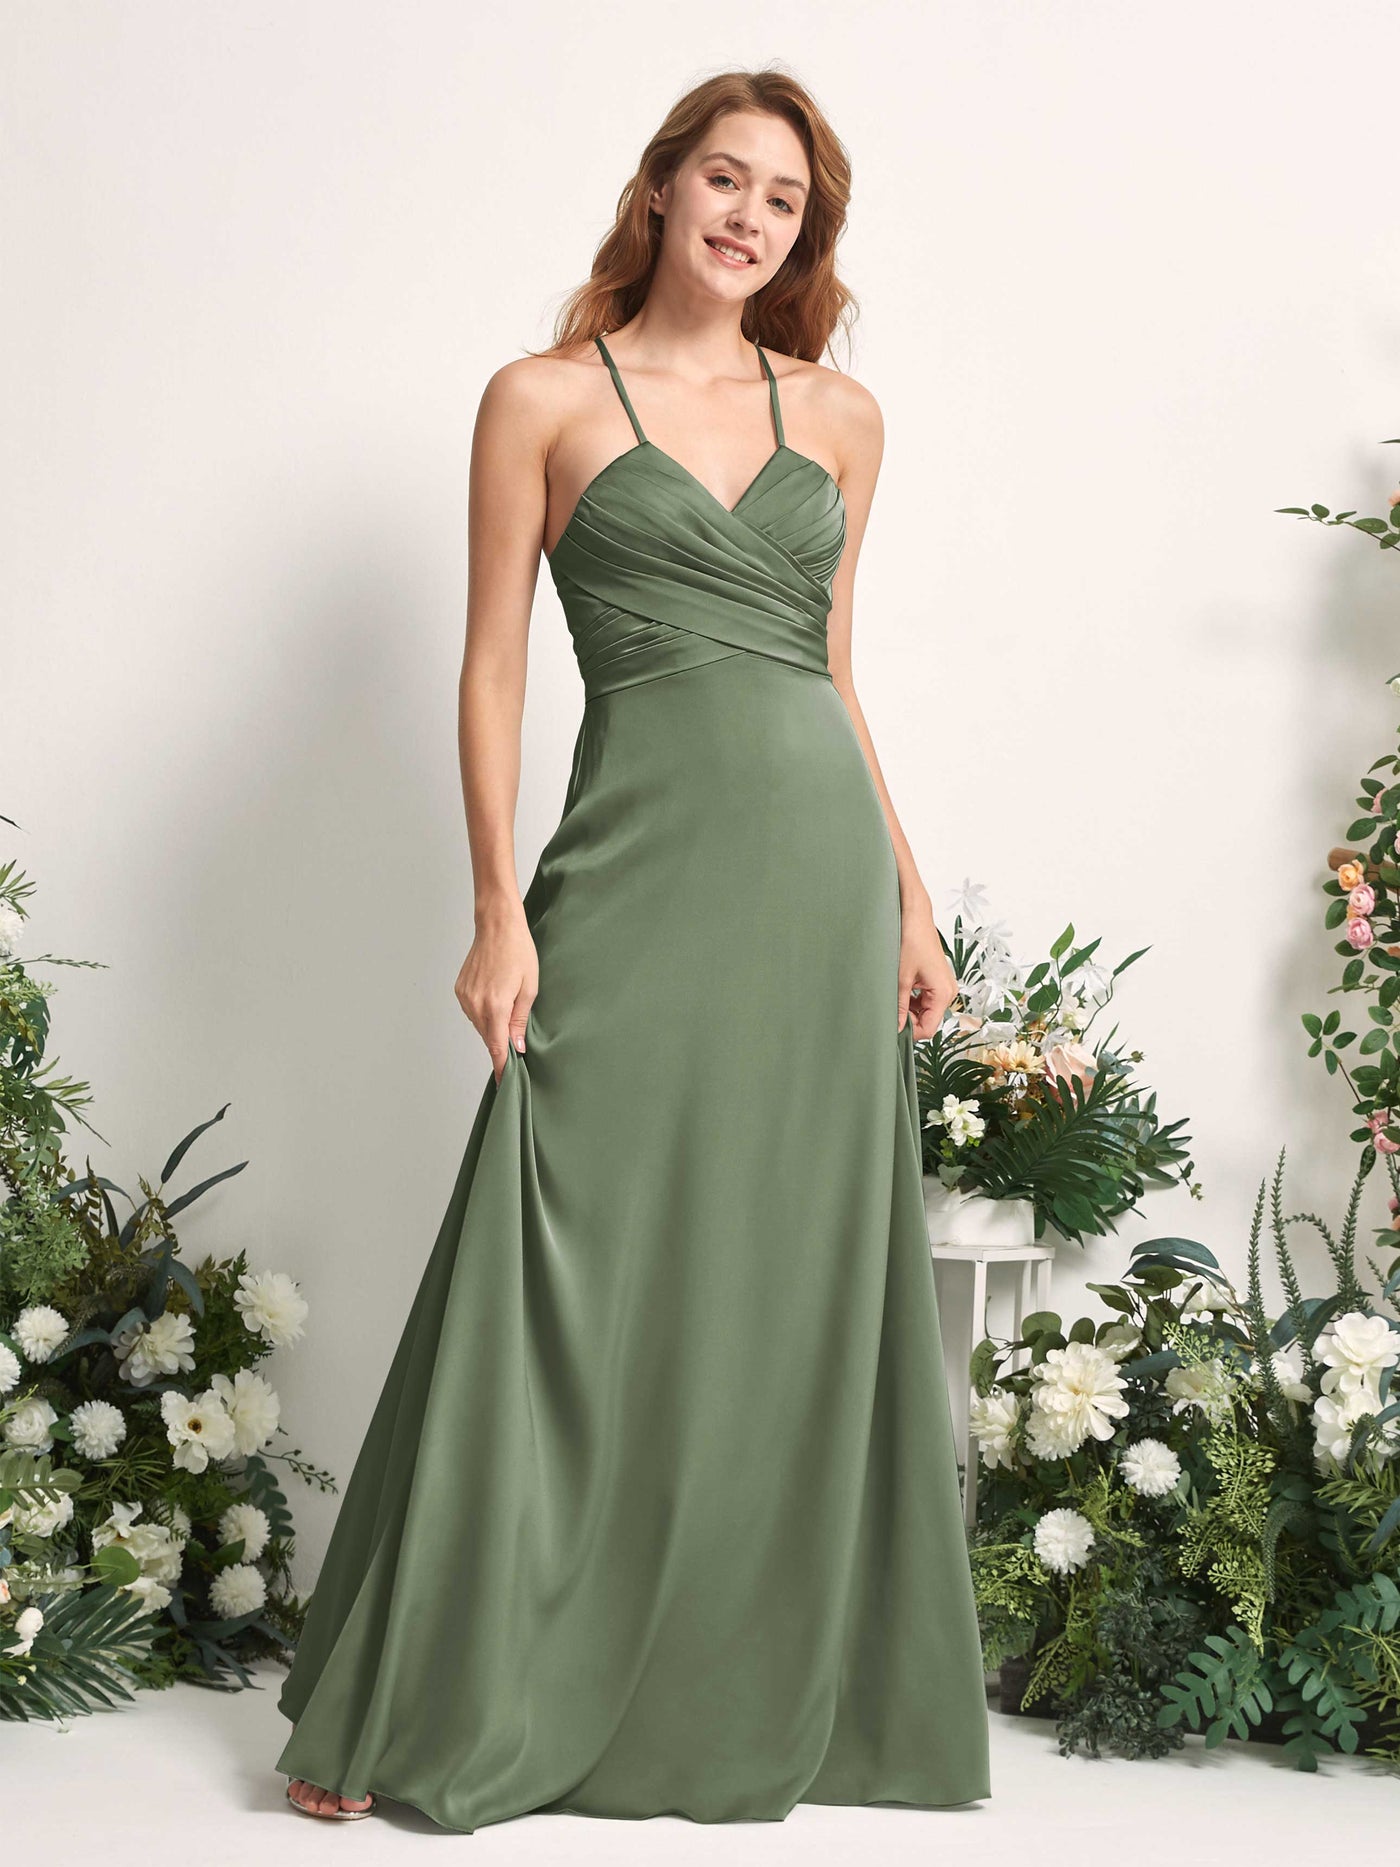 Green Olive Bridesmaid Dresses Bridesmaid Dress A-line Satin Spaghetti-straps Full Length Sleeveless Wedding Party Dress (80225770)#color_green-olive